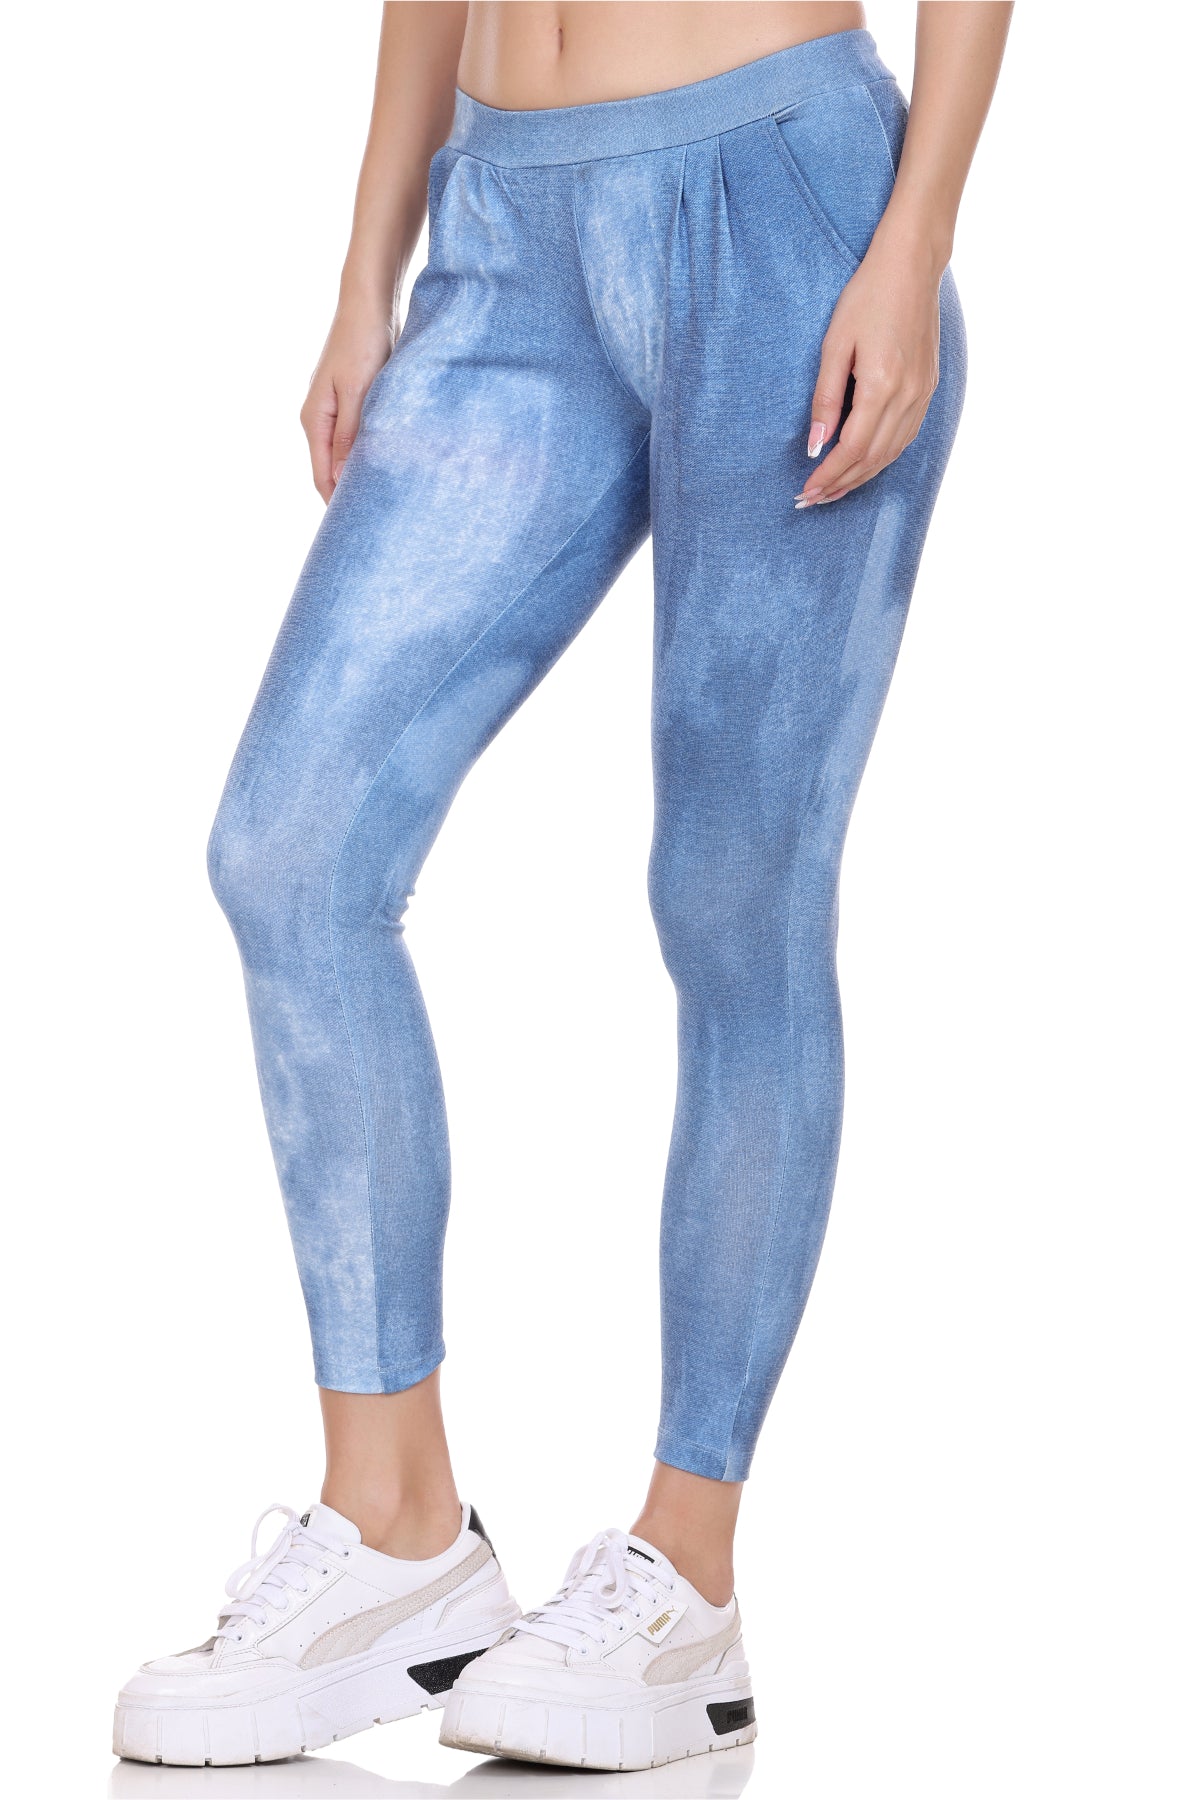 LESTIGE Pull-On Jeggings for Women Real Looking Denim Printed Skinny  Stretch Jean Leggings Tights S, M, L_BlackShadow_1062 (Large) at Amazon  Women's Clothing store